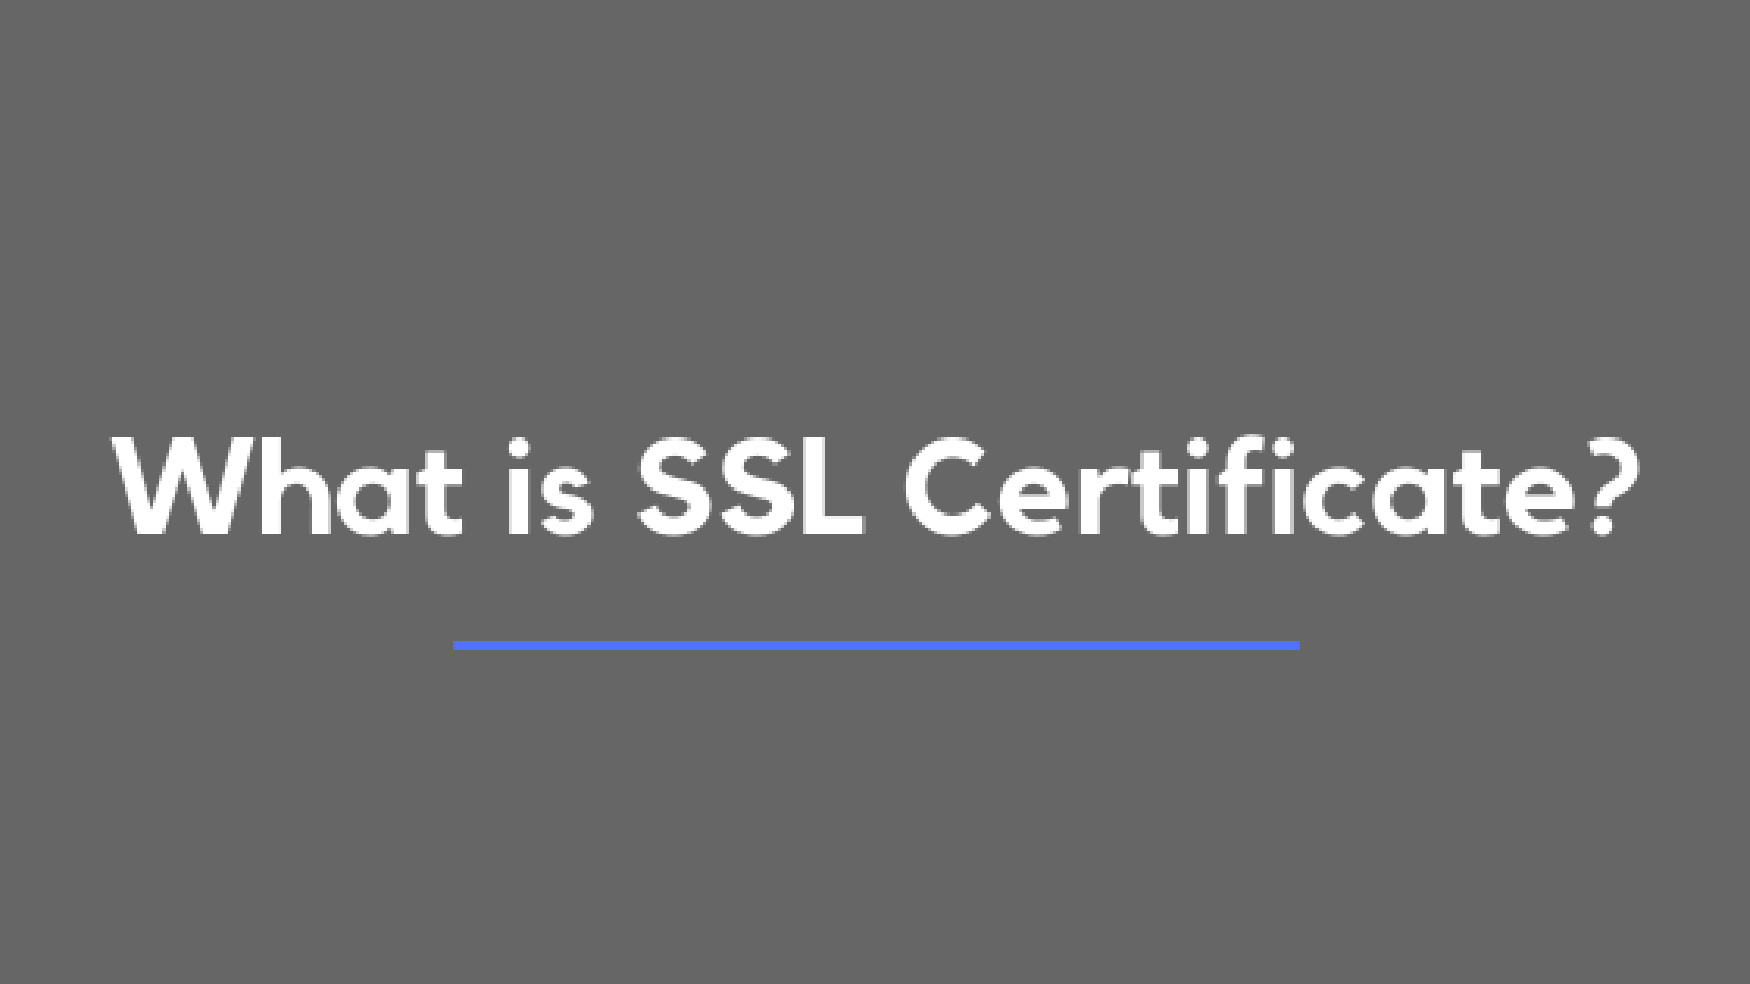 Everything you need to know about SSL Certificates